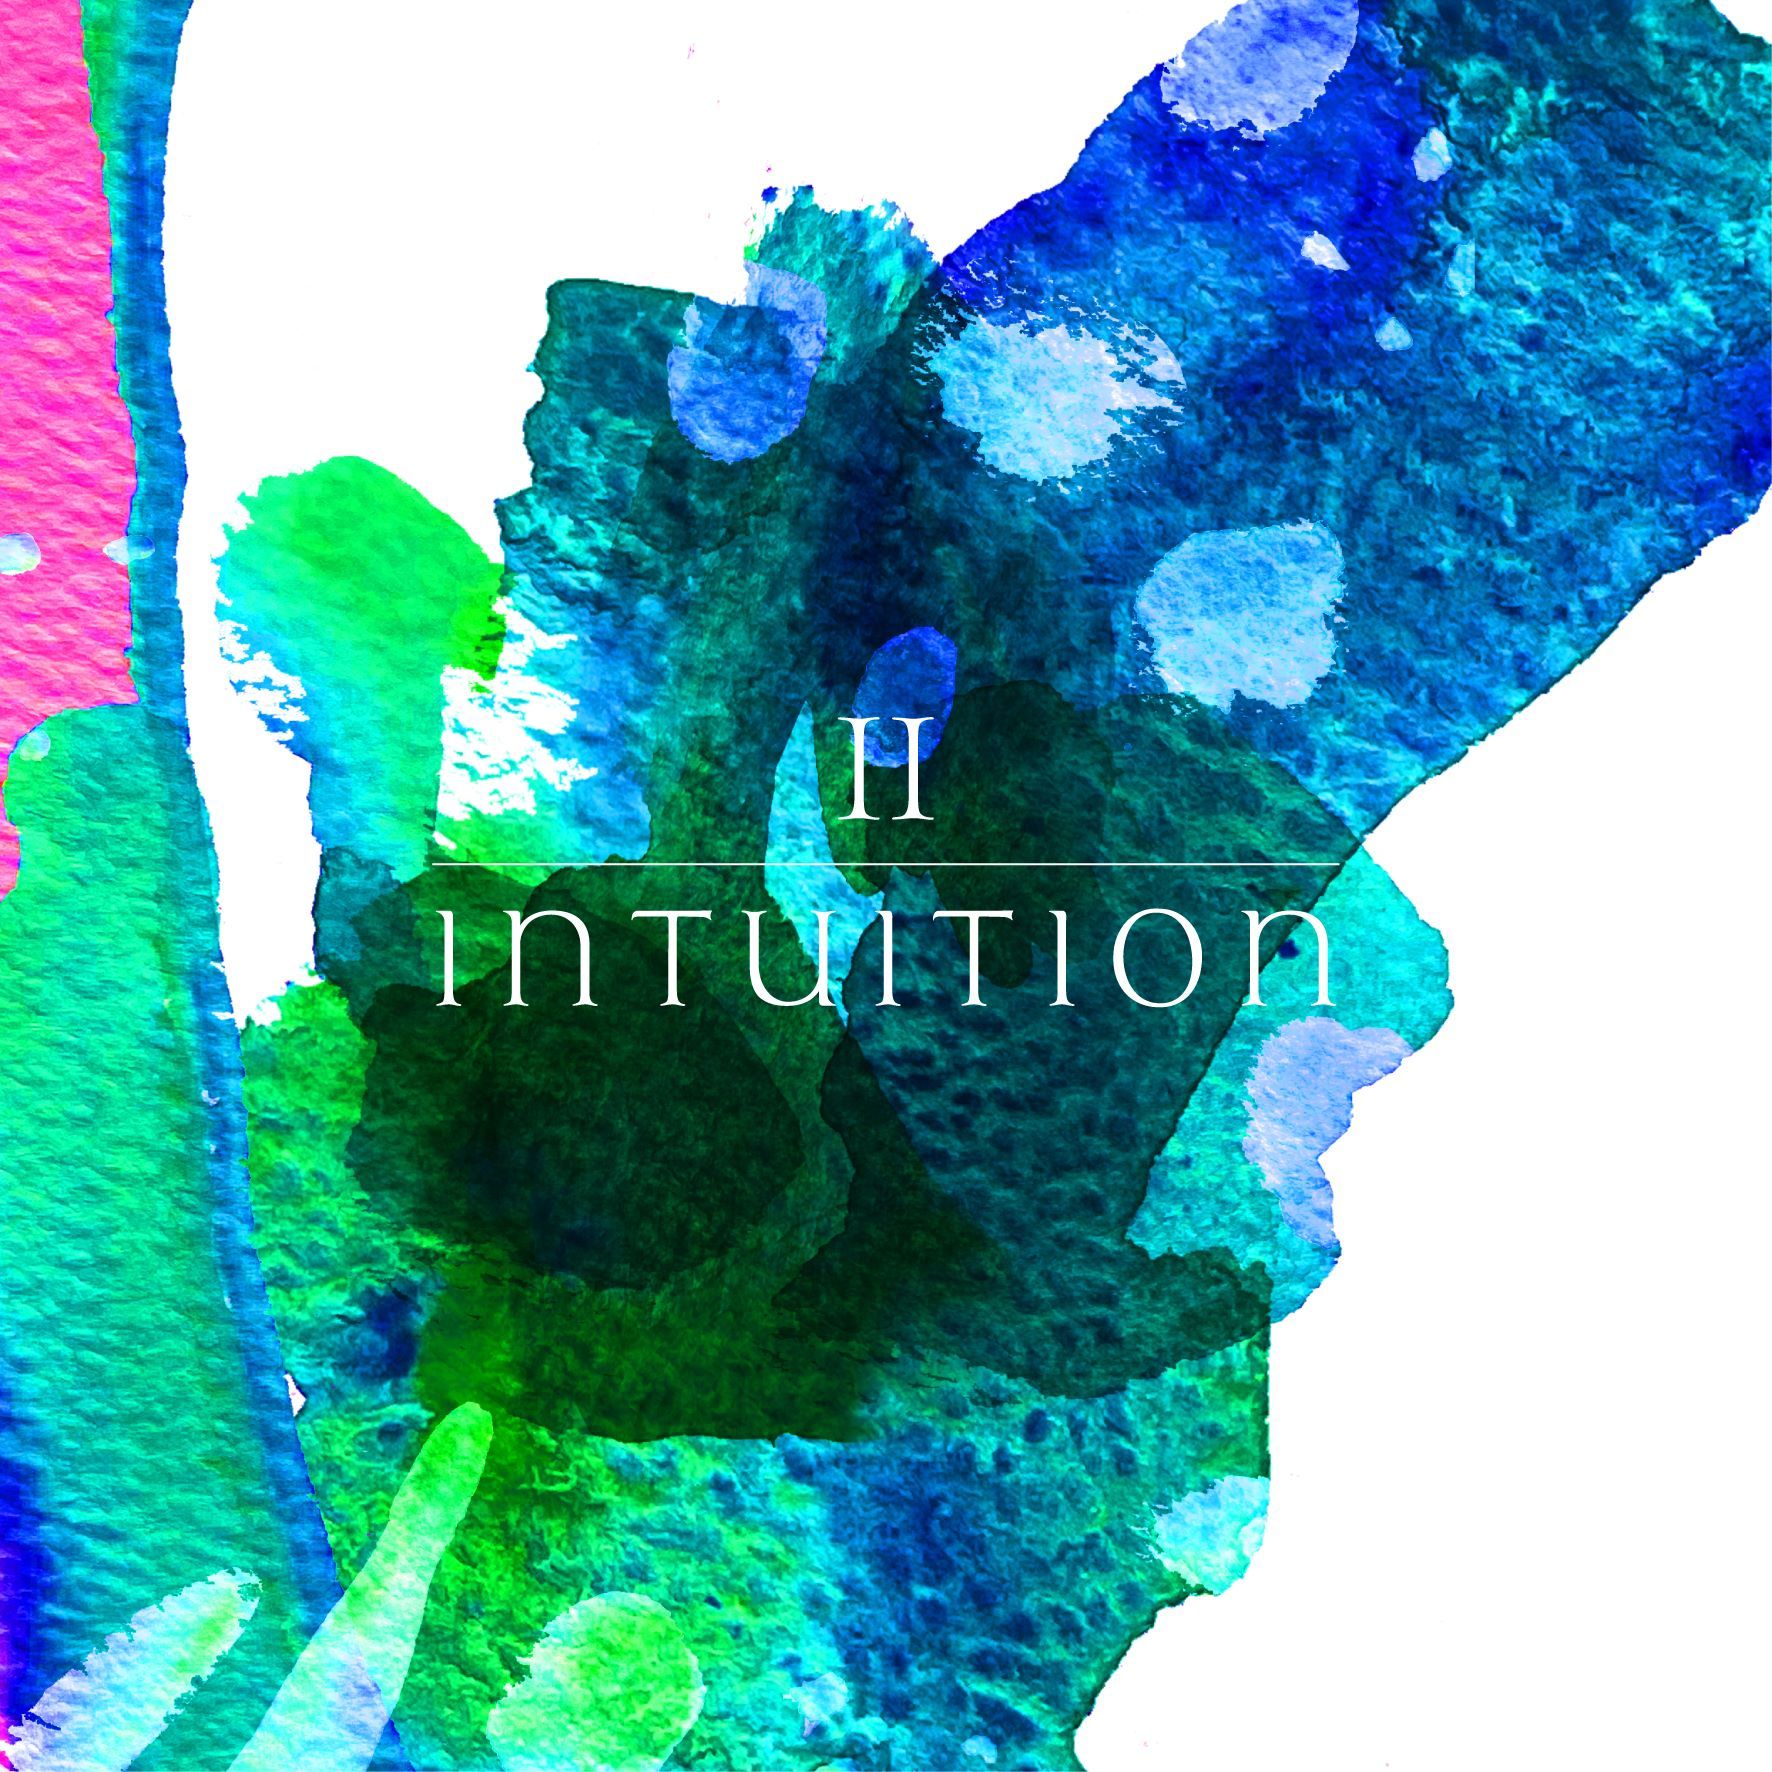 intuition / intuition2 beyond the noise is the point that transcends time　